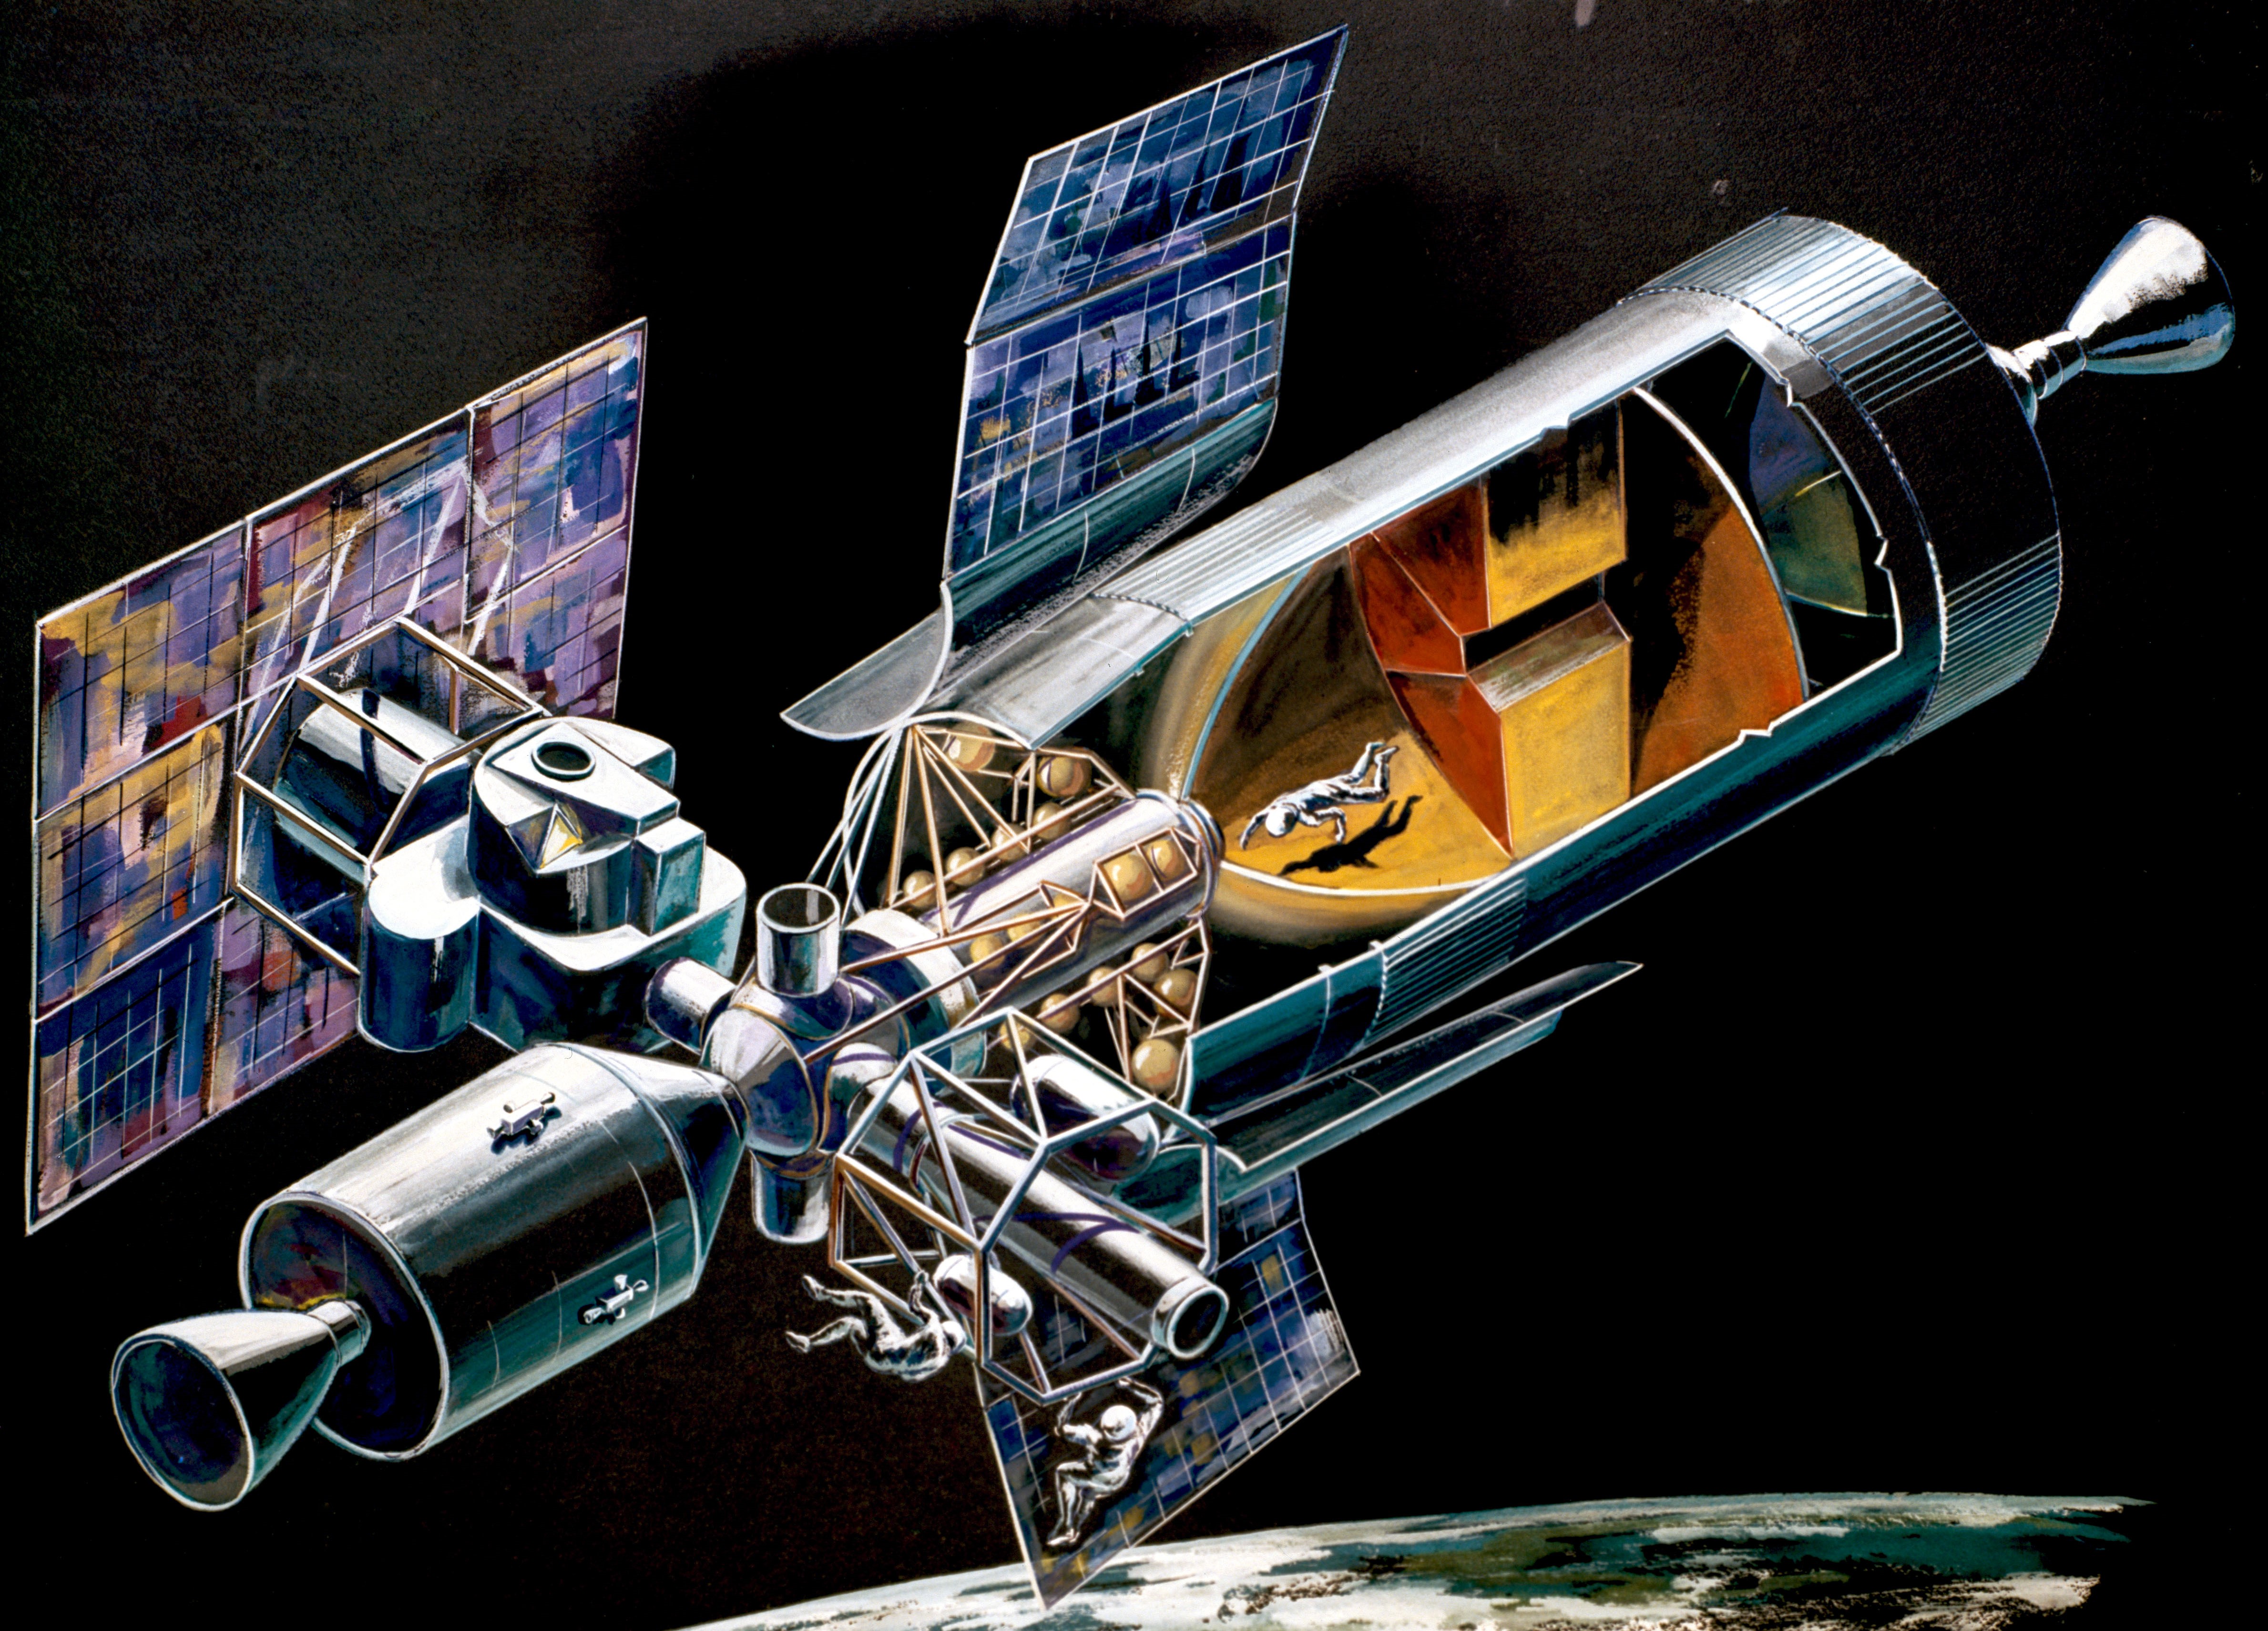 Illustration of the Apollo Applications Program experimental space station